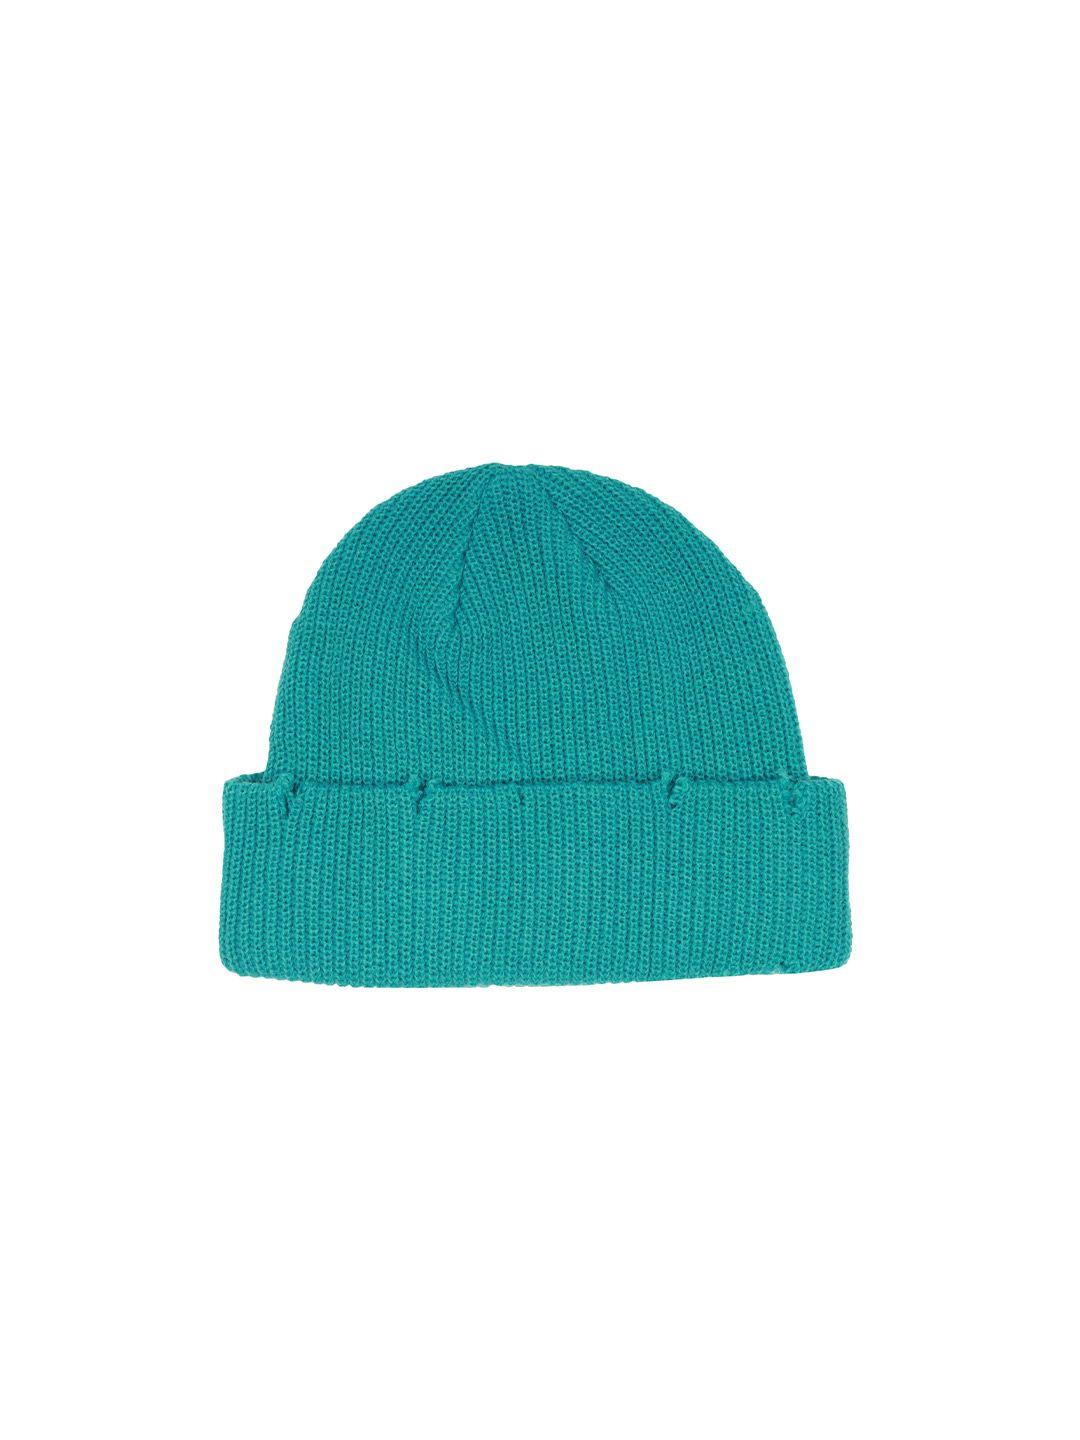 fabseasons adult turquoise blue beanie